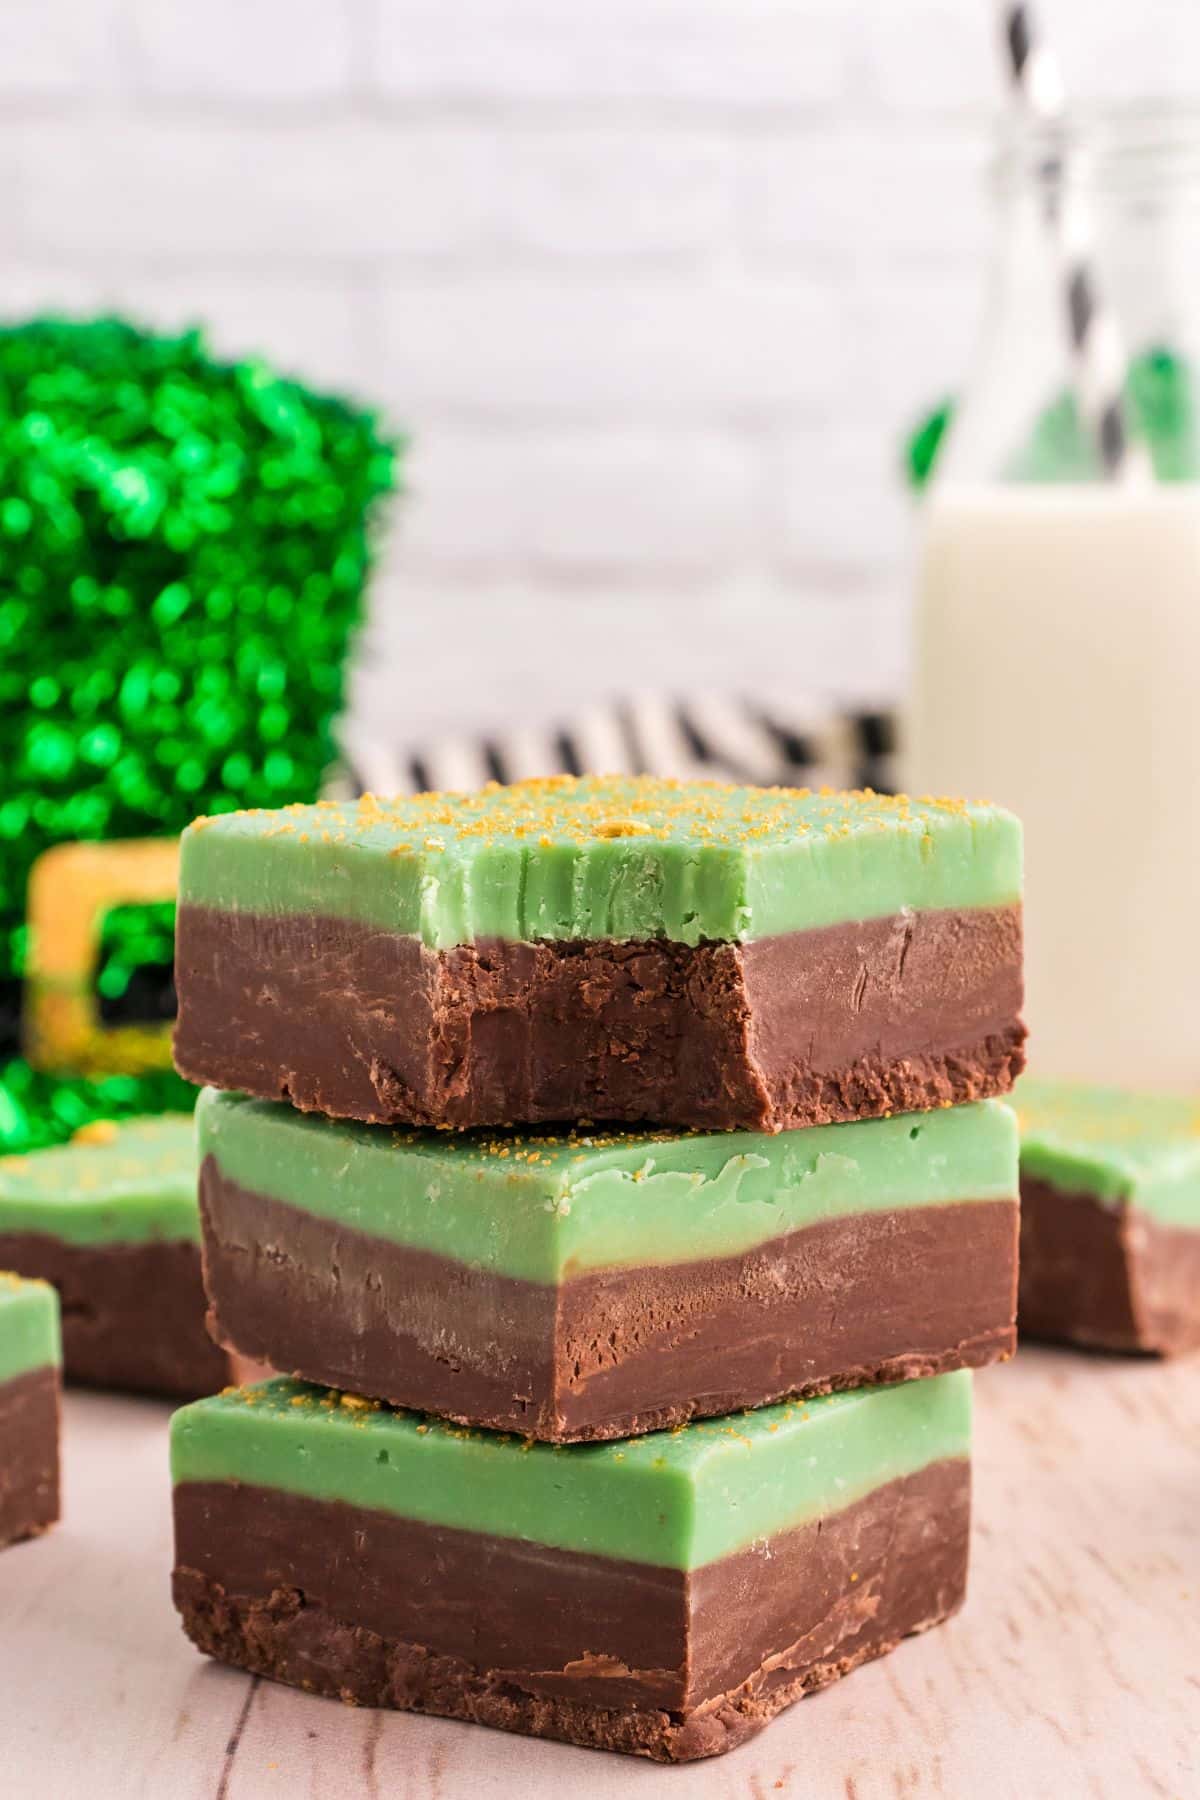 chocolate fudge with green mint chocolate on top